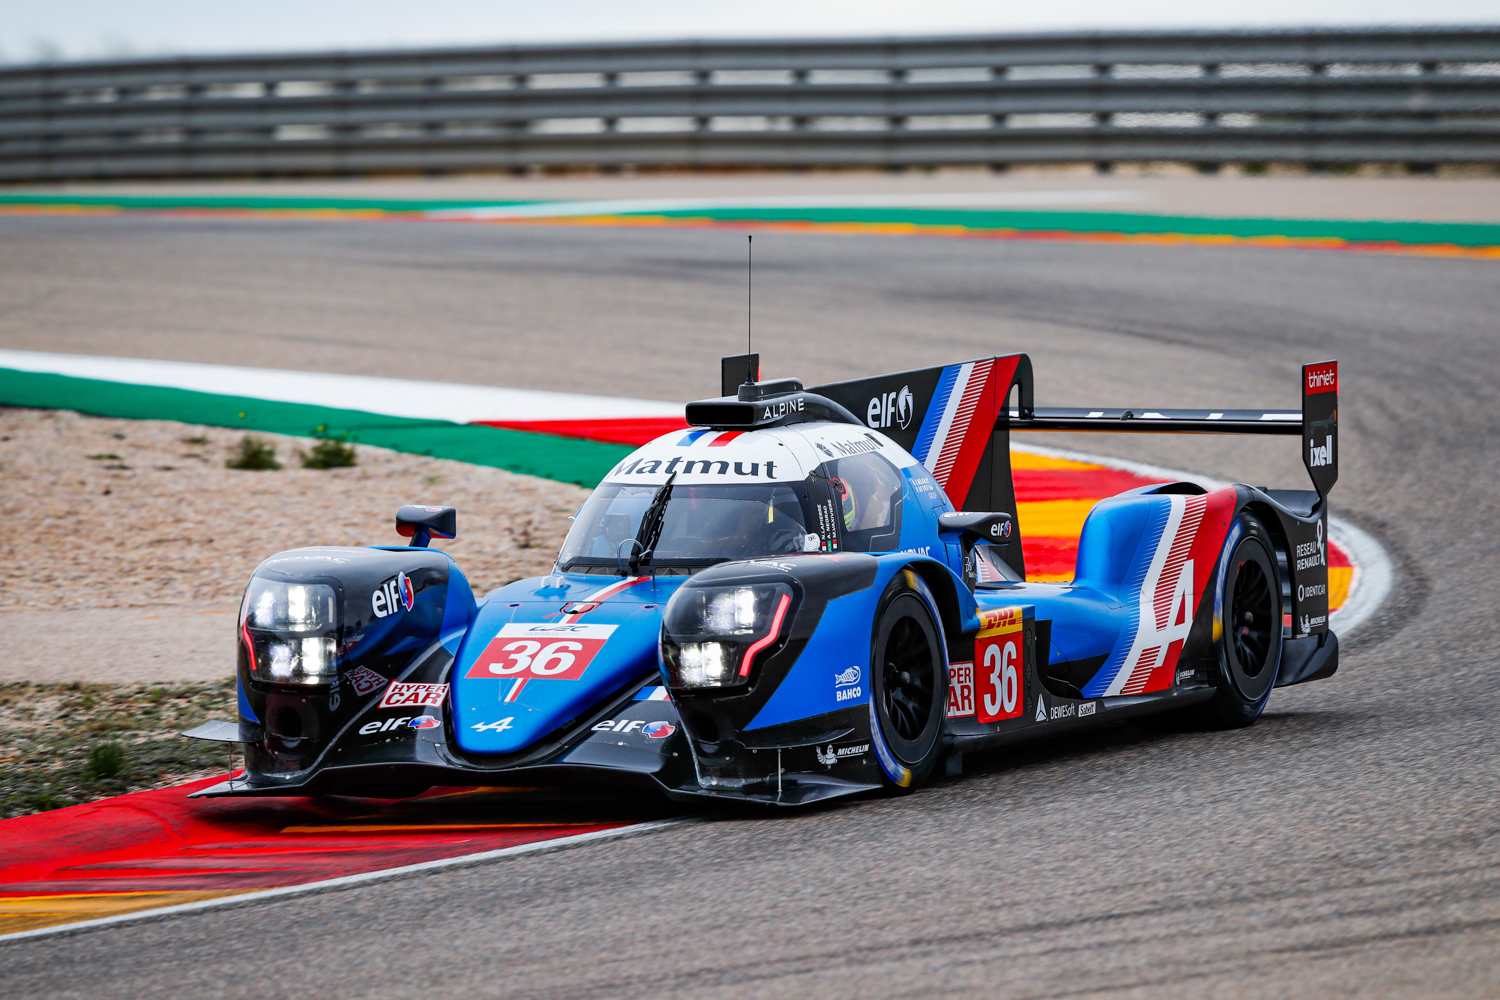 ALPINE A480 - TESTS SESSIONS ON THE MOTORLAND CIRCUIT Florent Gooden